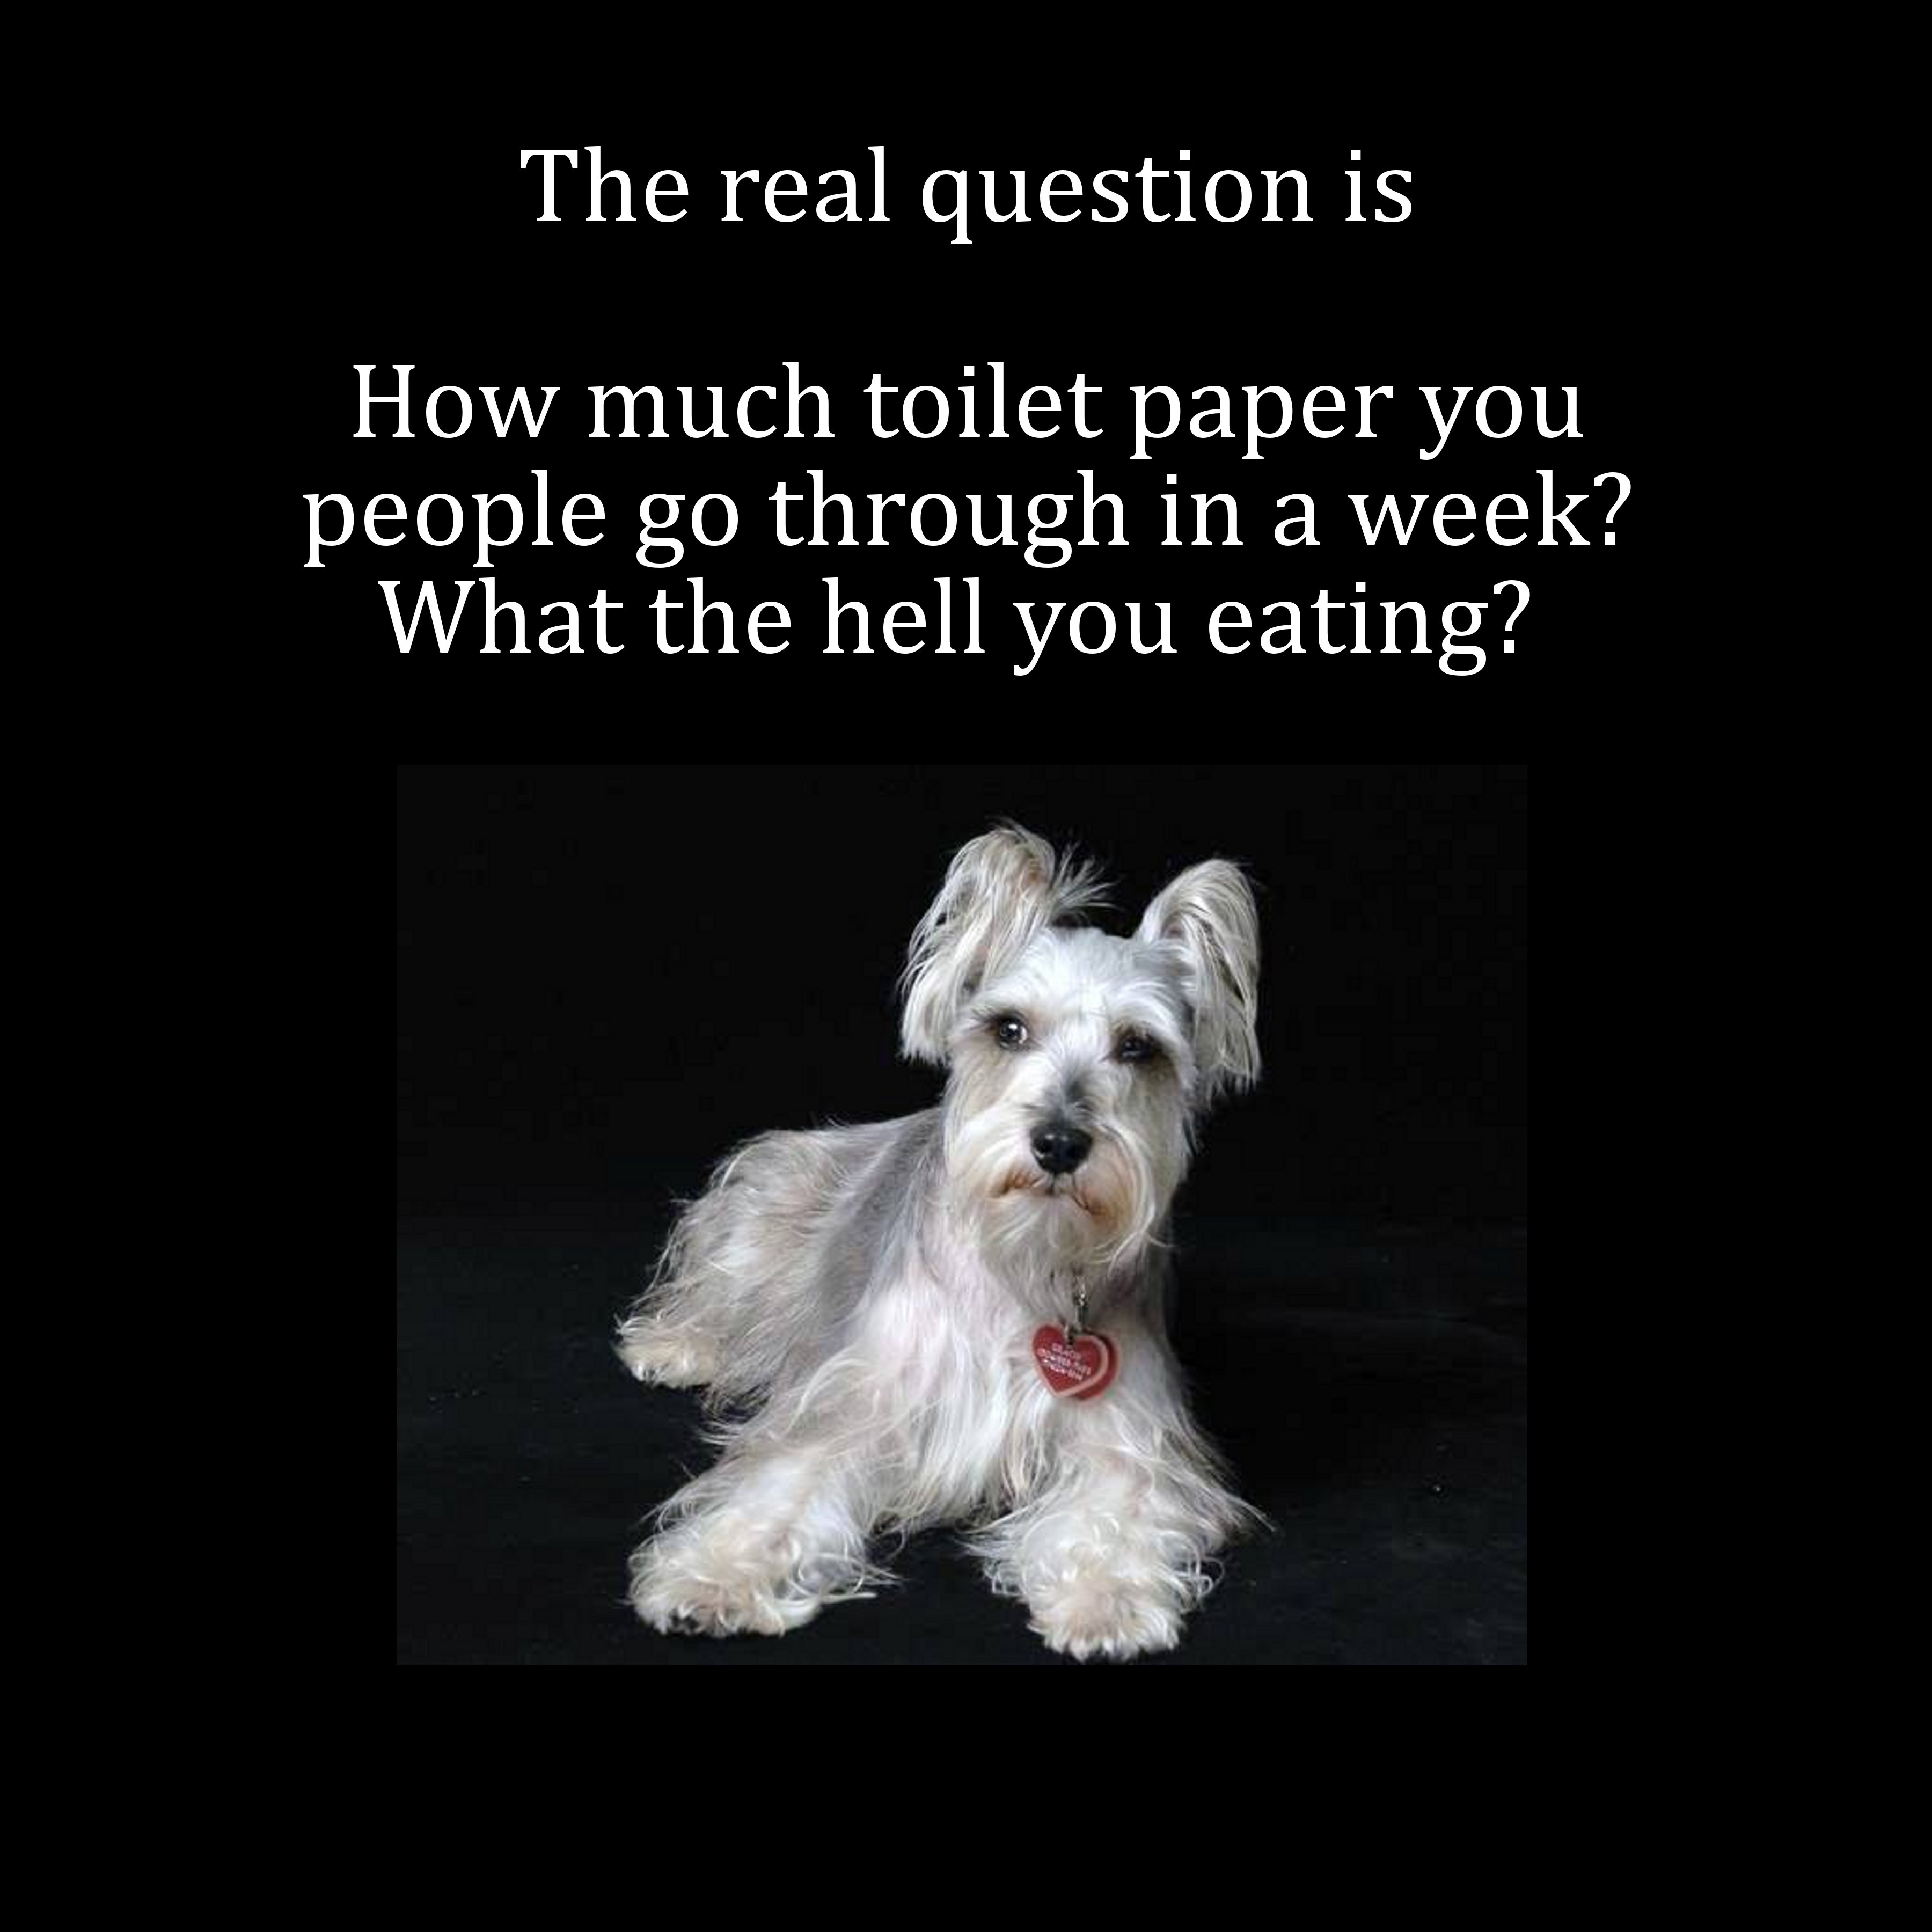 assembleia de deus - The real question is How much toilet paper you people go through in a week? What the hell you eating?